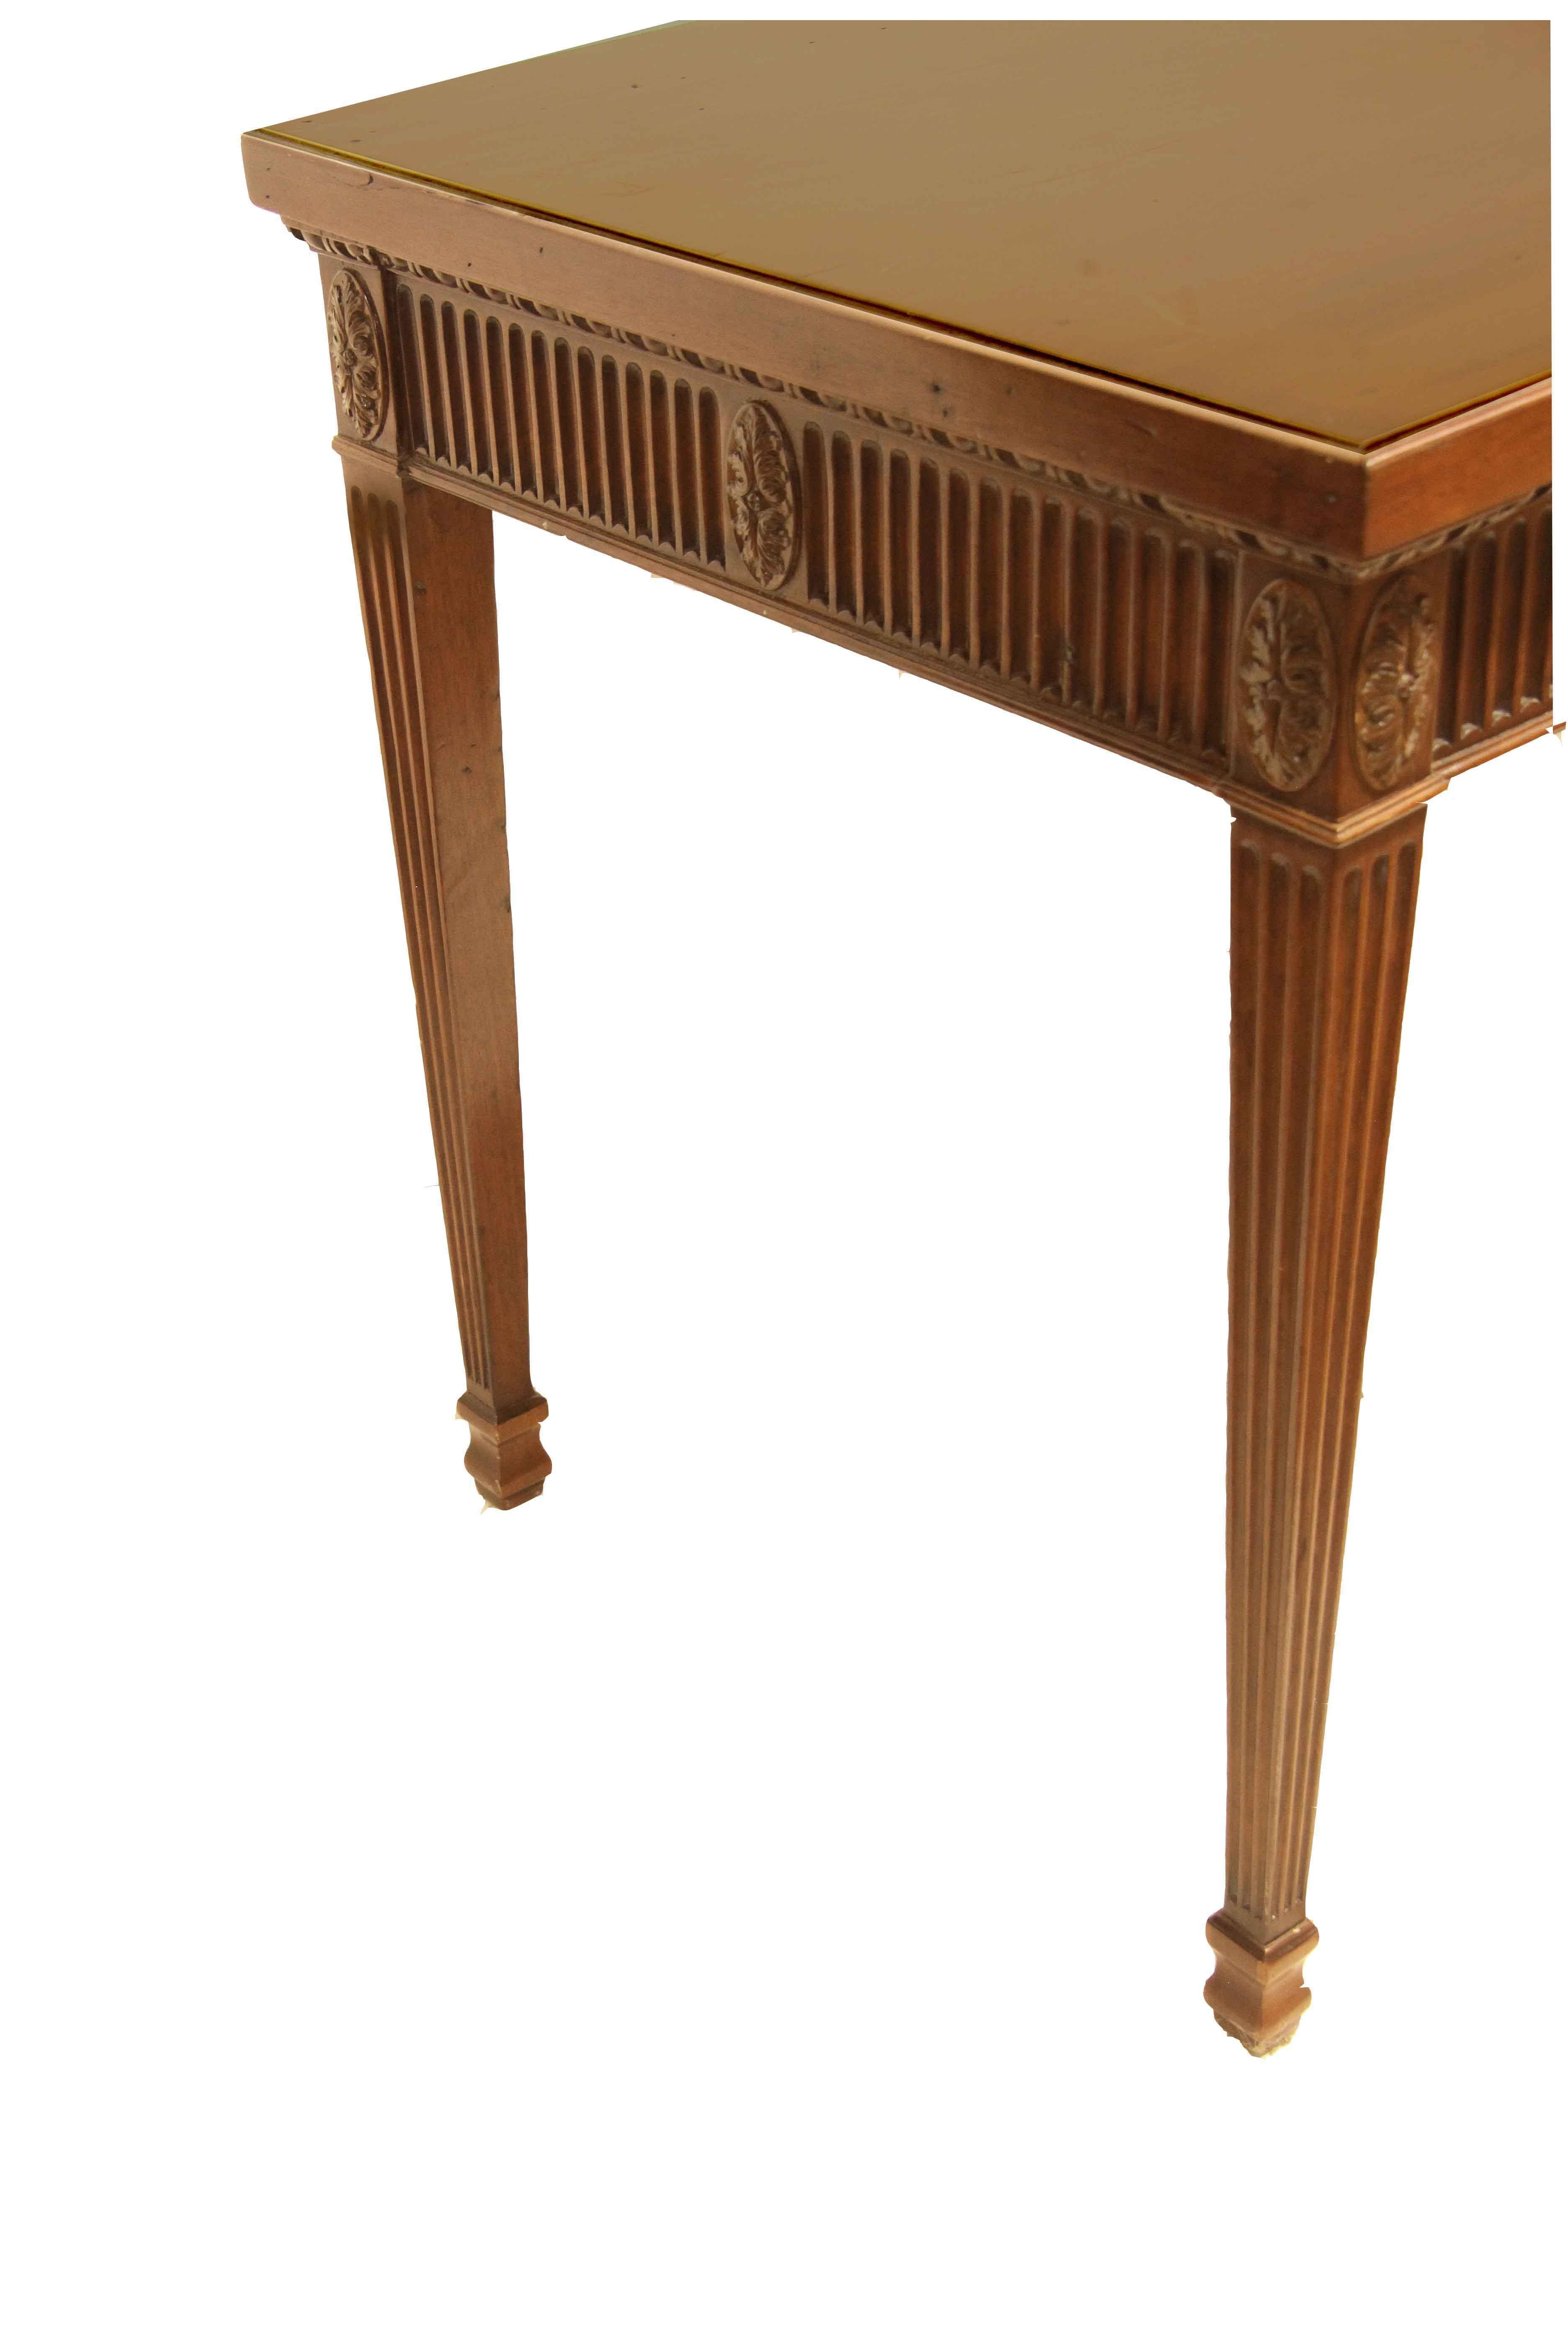 English Hepplewhite console table, this table is of the period, dating circa 1800, the top was obviously selected for its fabulous grain and its remarkable width (the top is one board, over 28'' wide). The top is surrounded by a flat 1.5'' molding.